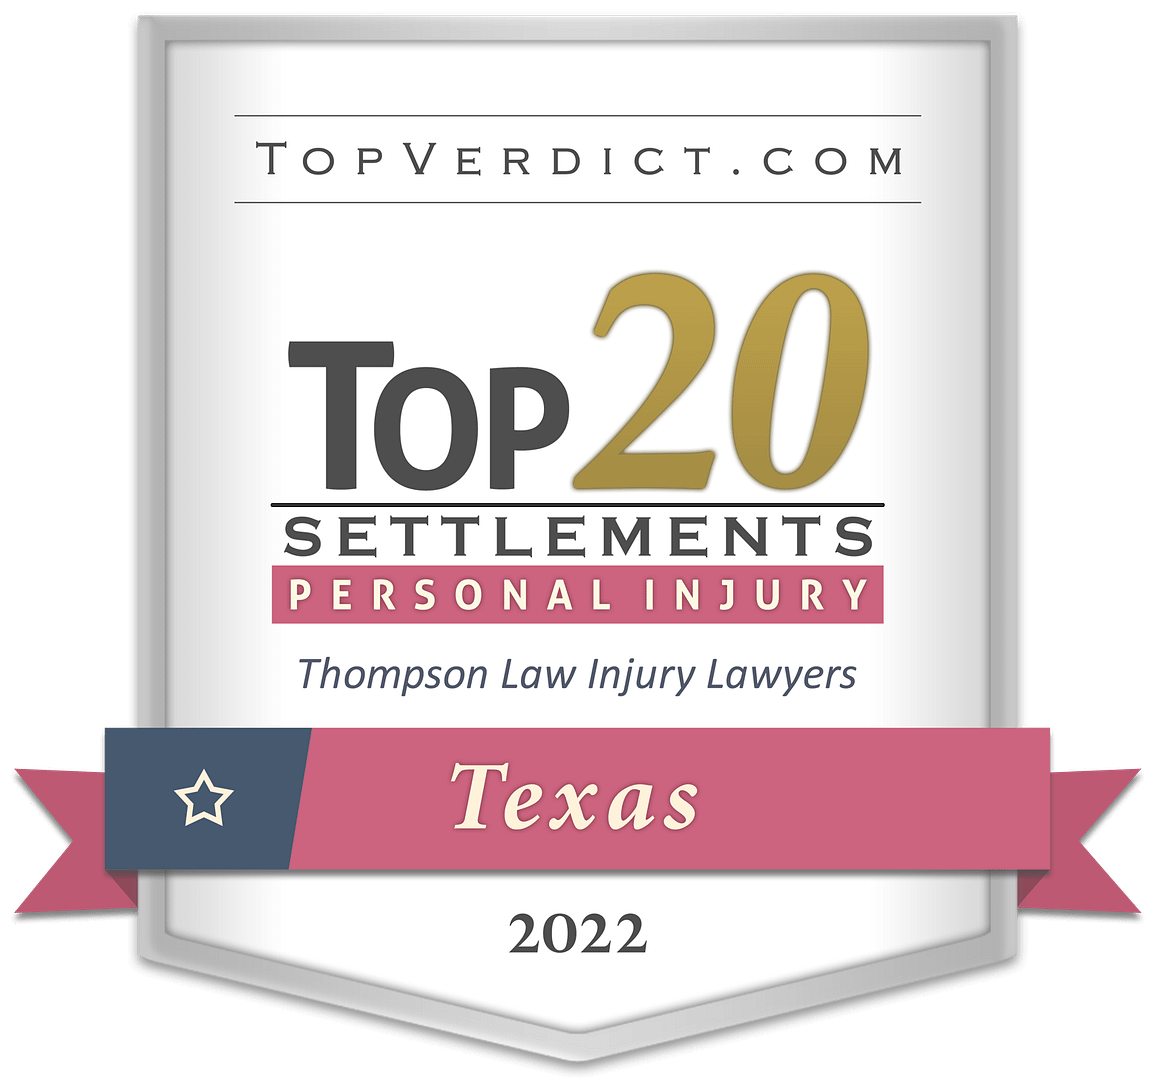 TopVerdict Top 20 personal injury settlements in Texas 2022 badge - Dallas Personal Injury Law Firm